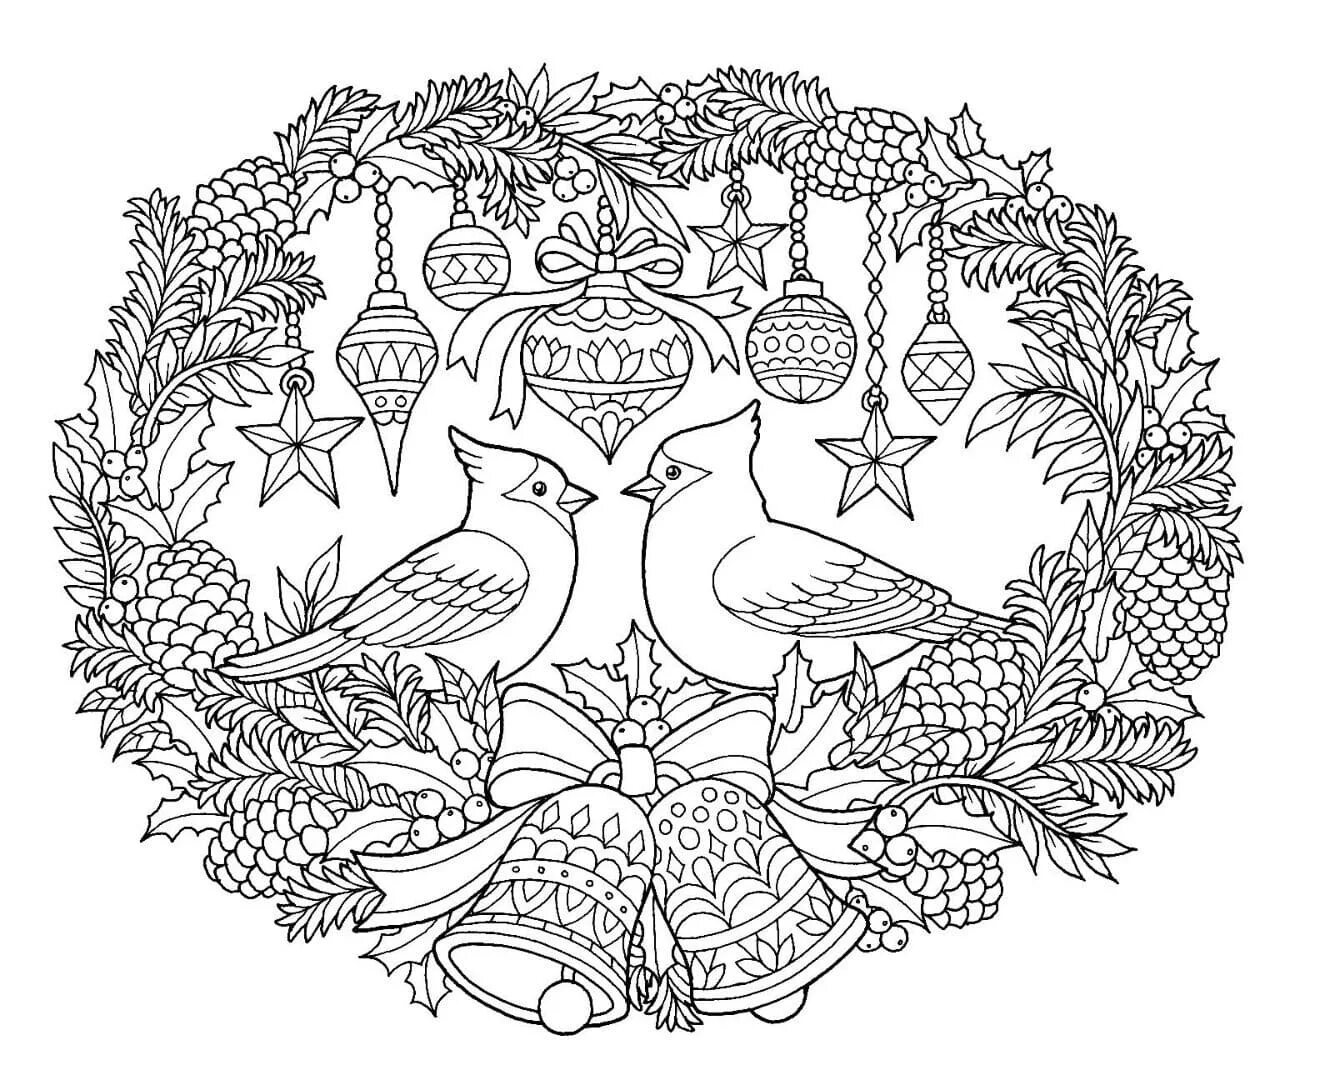 Coloring book luxurious winter bouquet